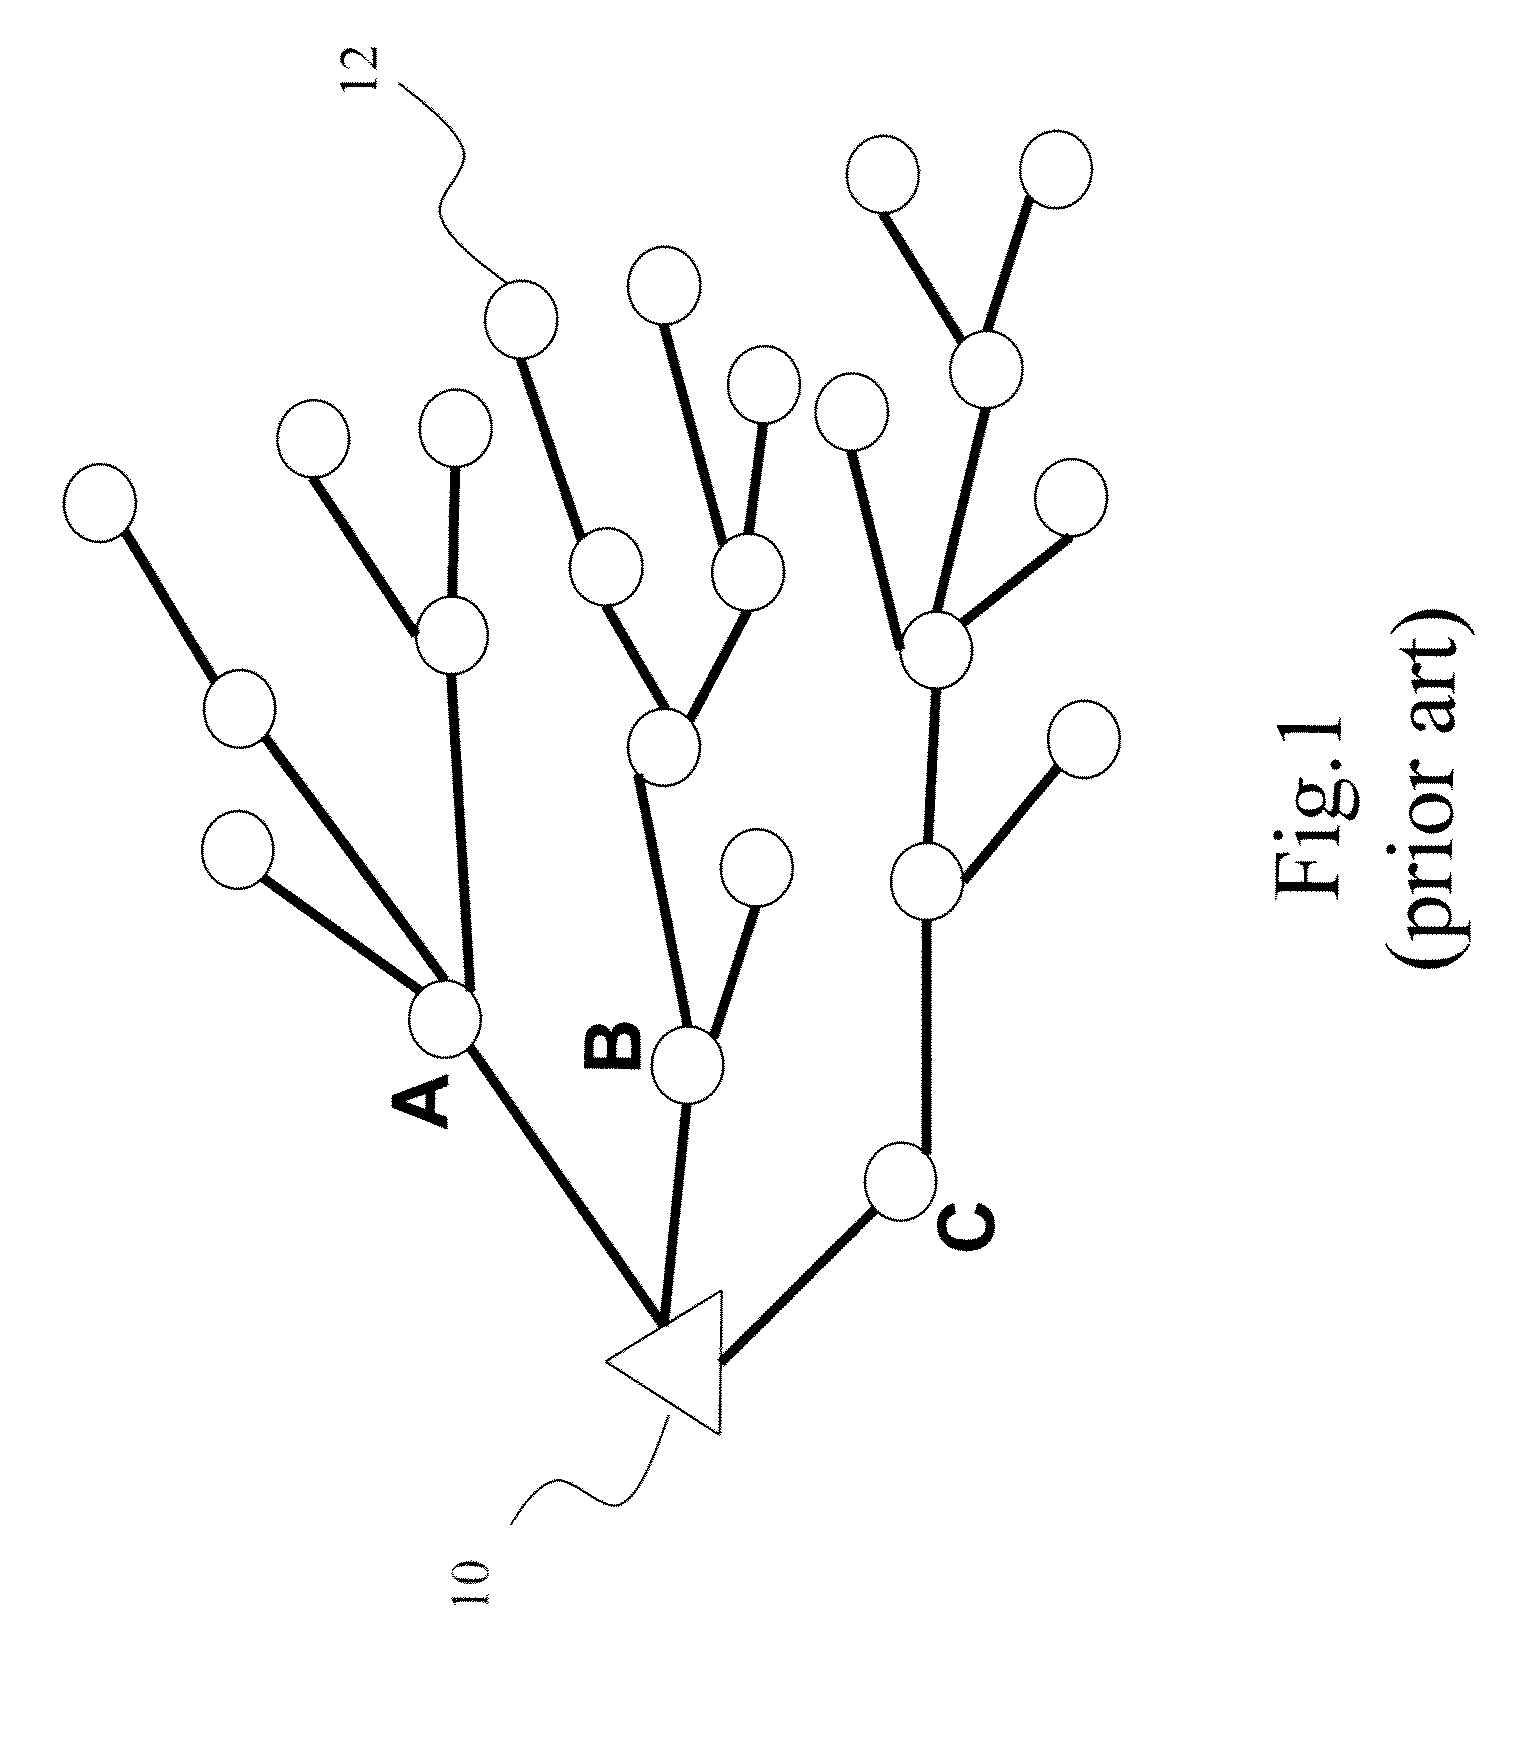 Power-efficient backbone-oriented wireless sensor network, method for constructing the same and method for repairing the same